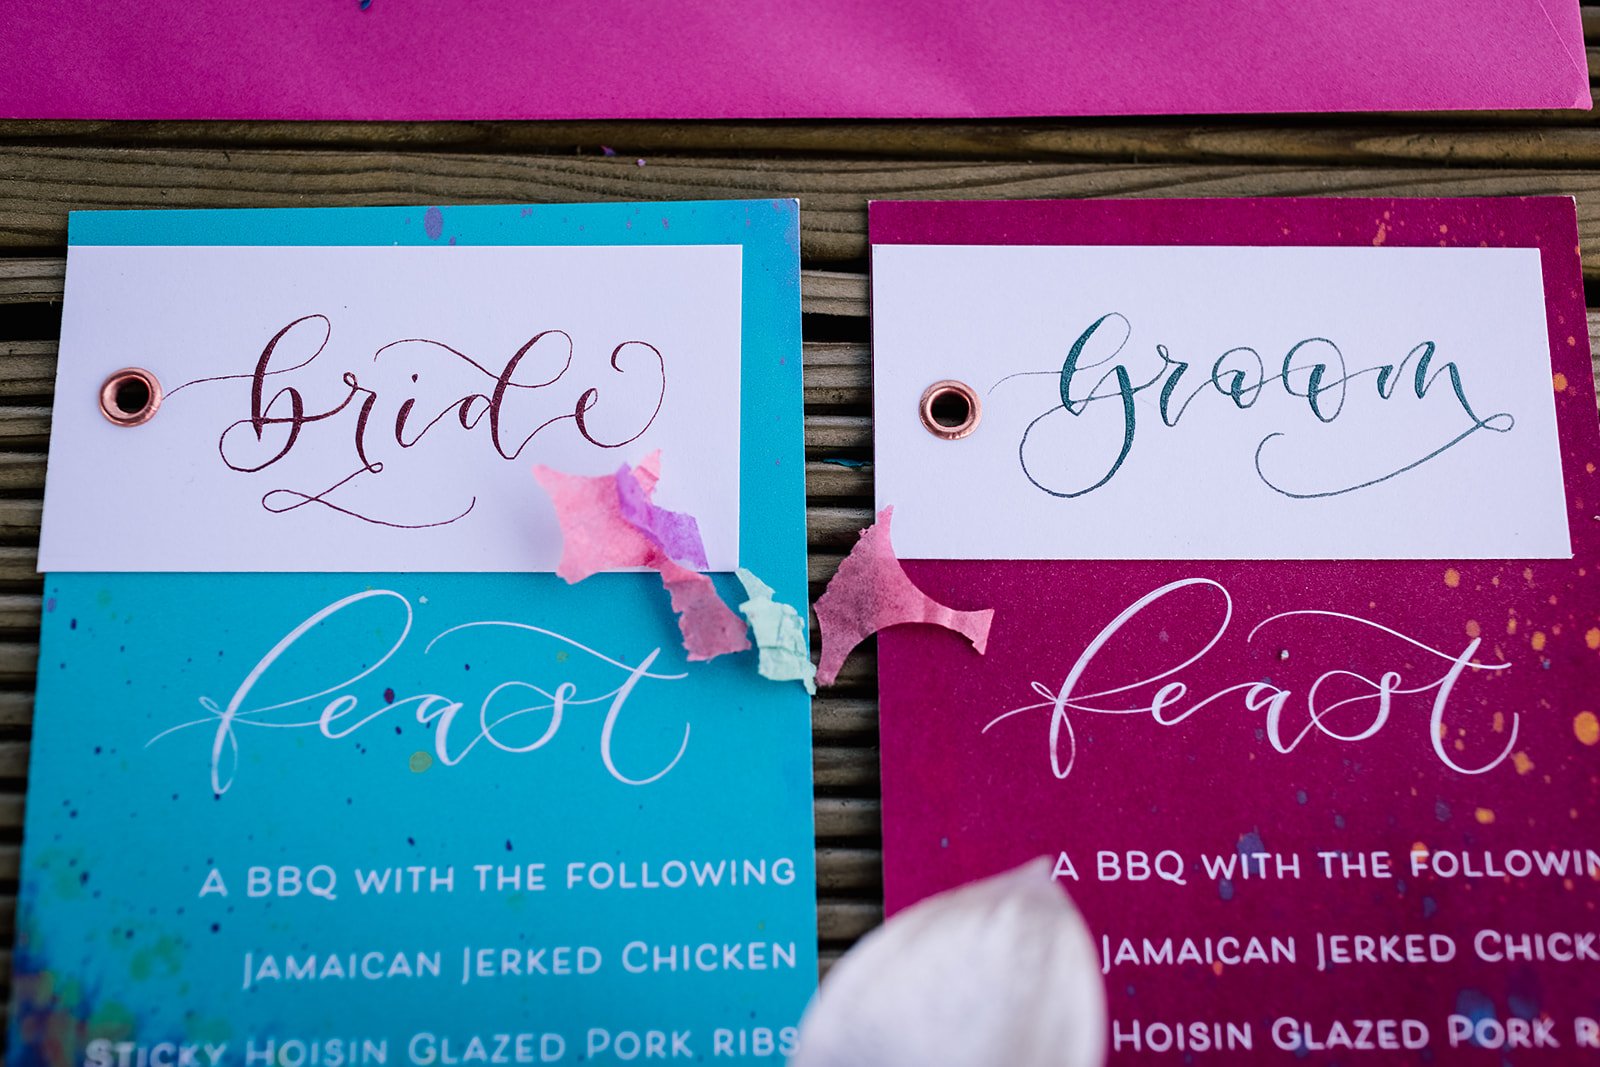 Festival wedding stationery watercolour wedding stationery with hot pink orange and blue,calligraphy place cards and layered menus Bride and groom  combined placecards.jpg